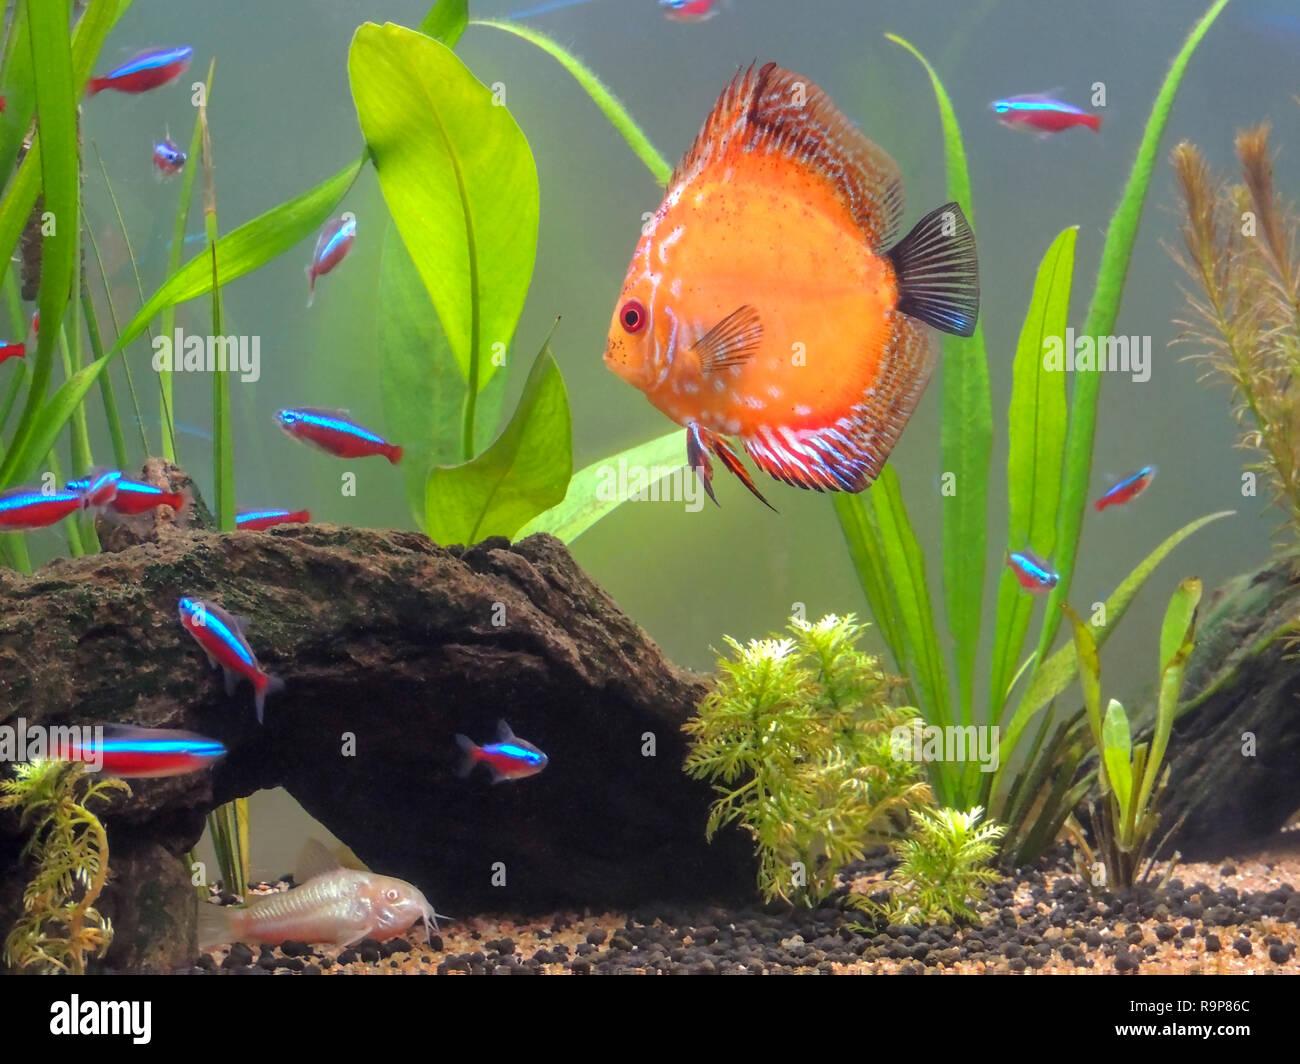 A Discus fish swimming in a fresh water aquarium surrounded by some plants, trunks and many Neon fishes and a Albino Corydora over the gravel Stock Photo